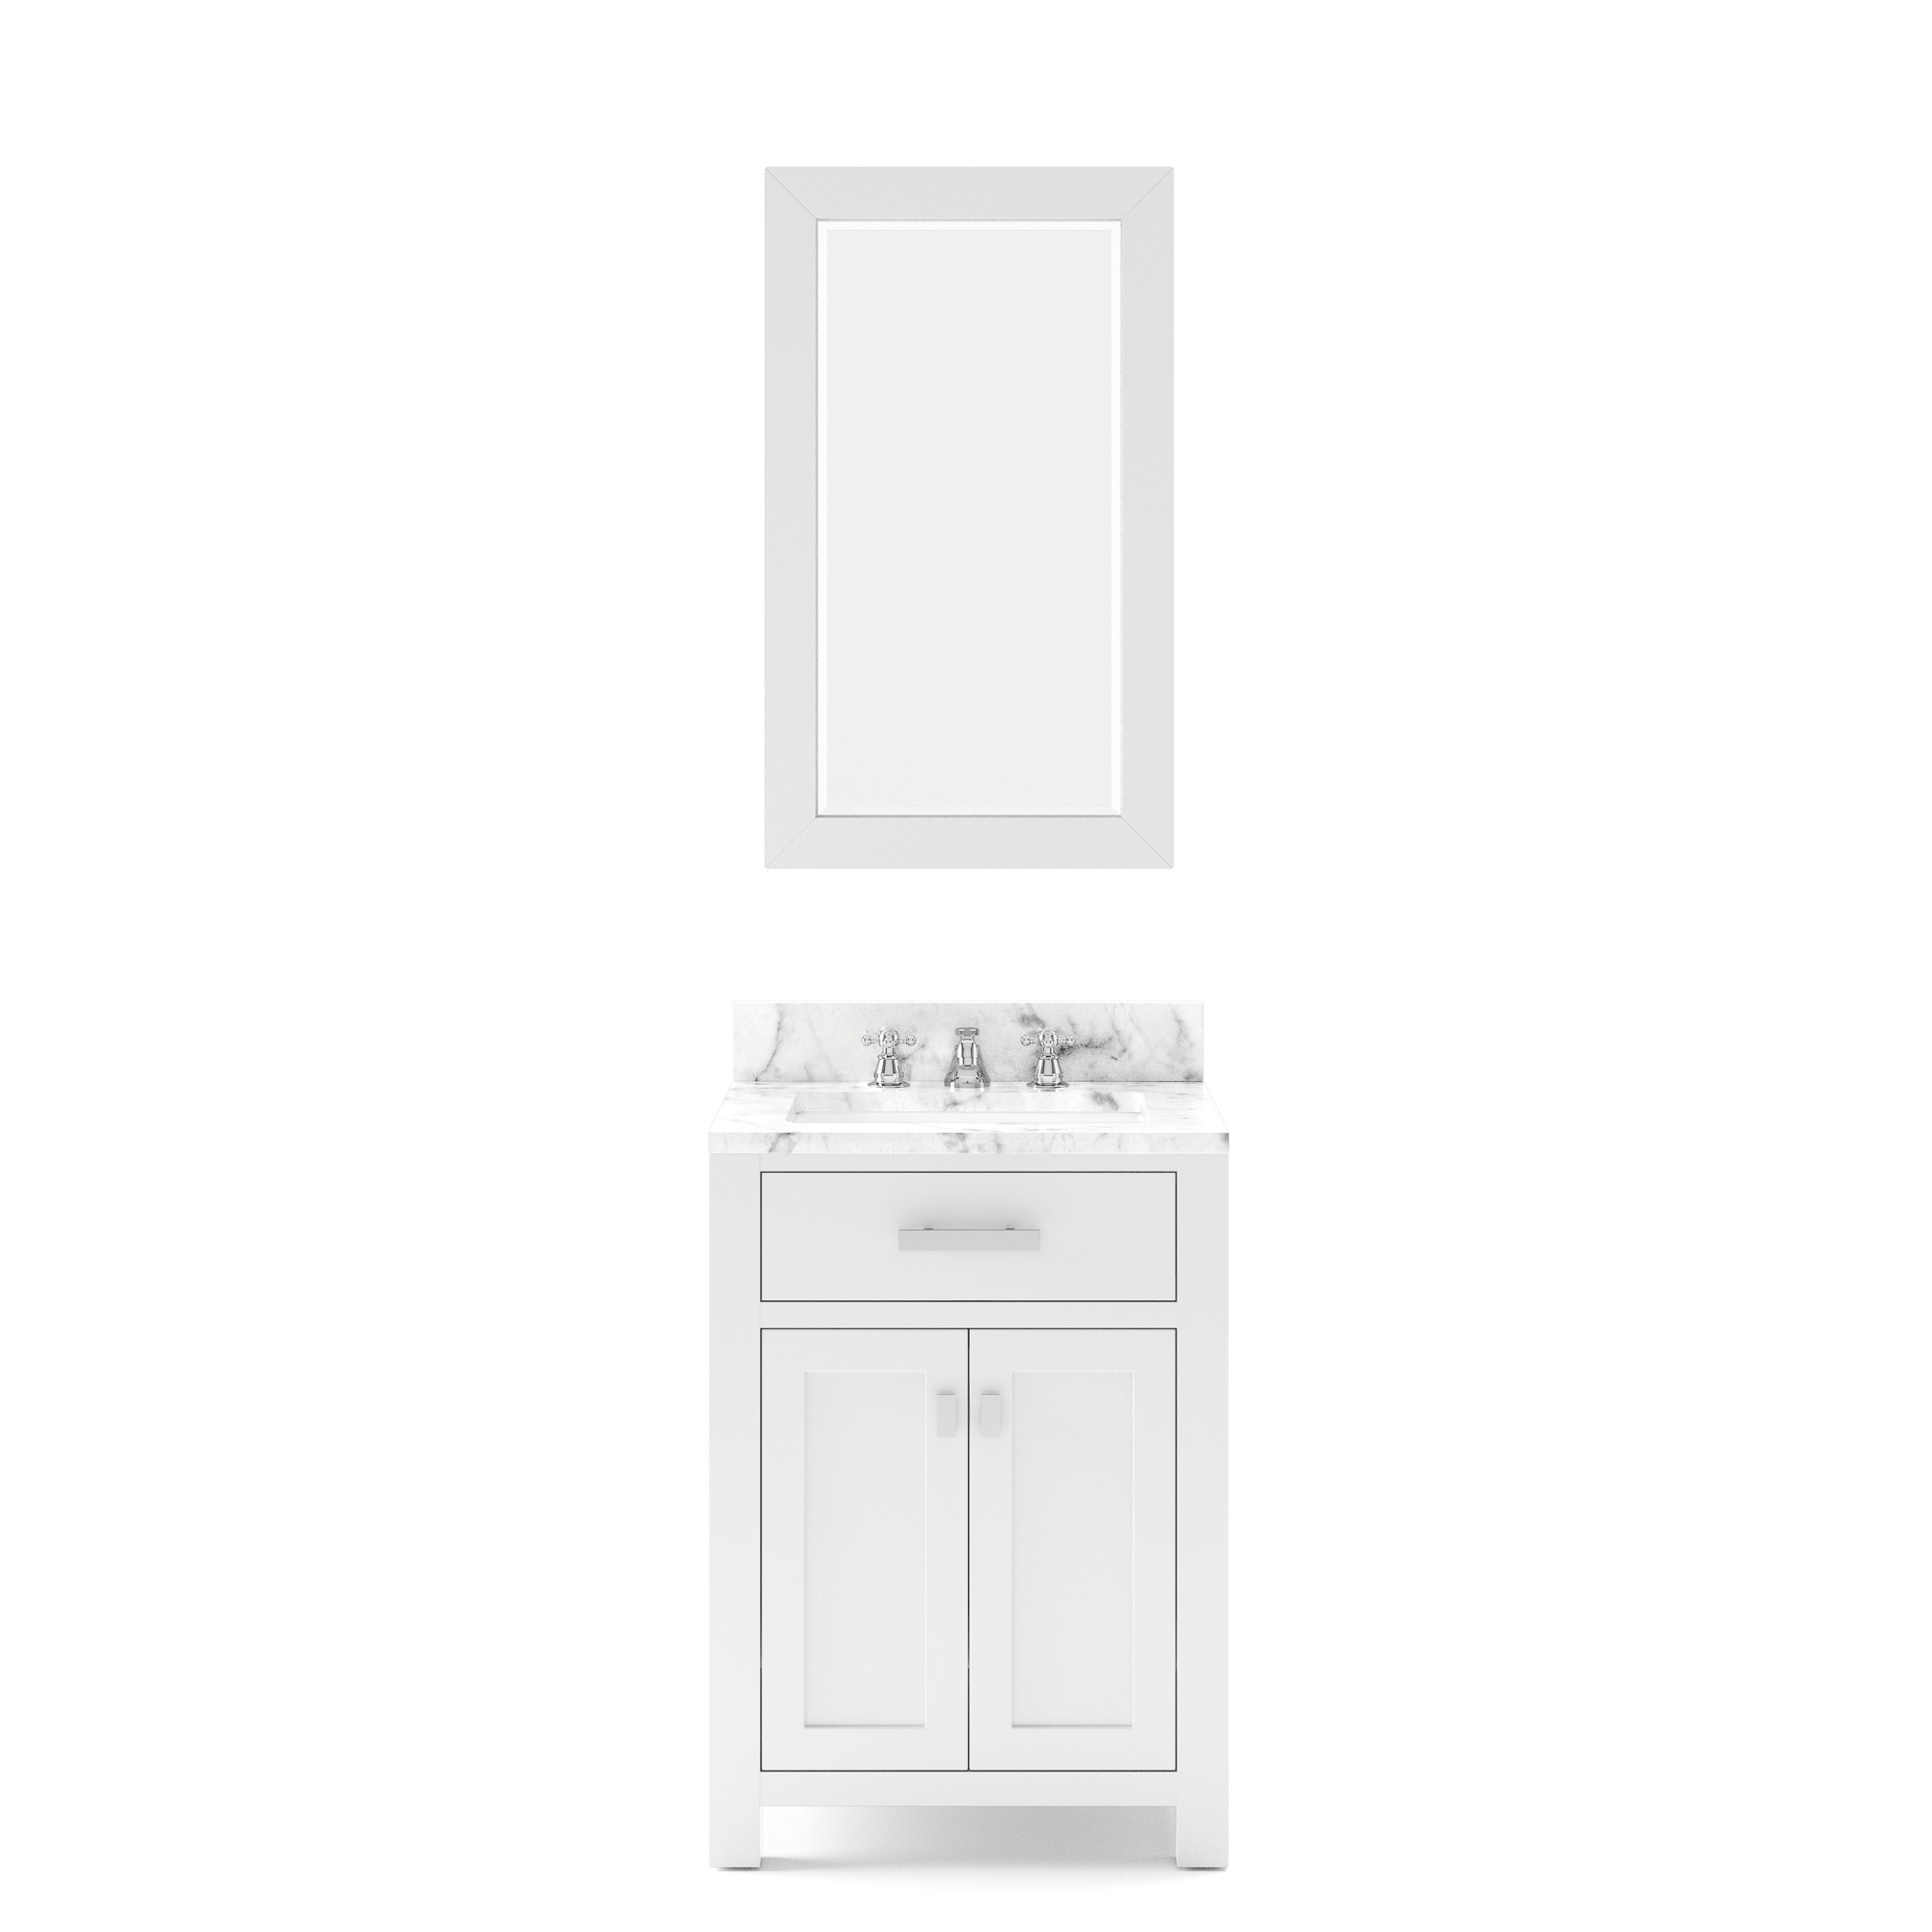 WATER-CREATION MS24CW01PW-R21000000 MADISON 24 INCH PURE WHITE SINGLE SINK BATHROOM VANITY WITH MATCHING FRAMED MIRROR